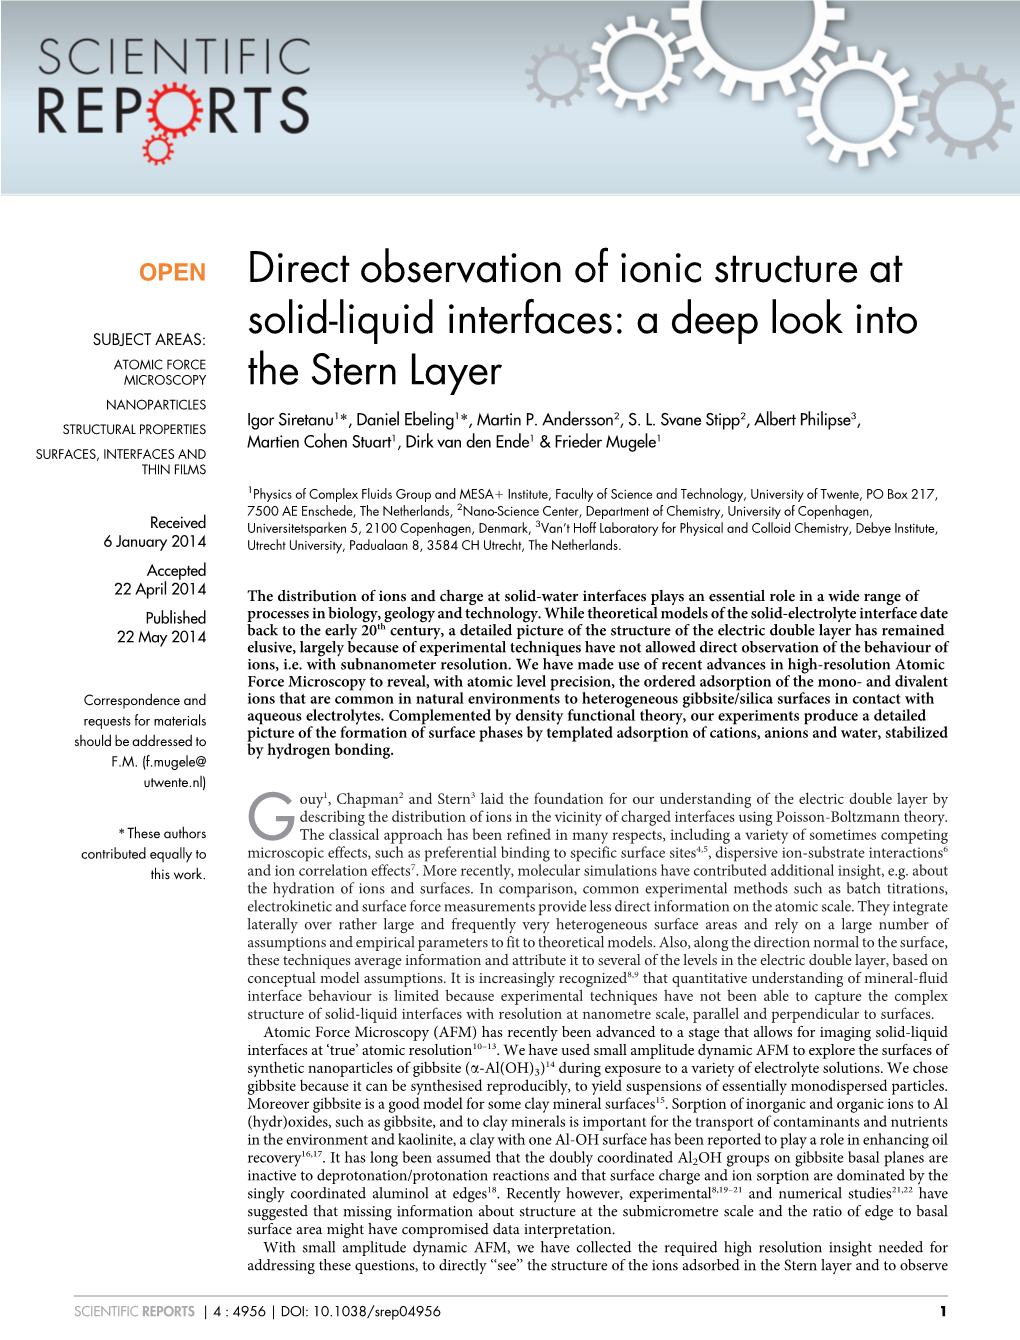 Direct Observation of Ionic Structure at Solid-Liquid Interfaces: a Deep Look